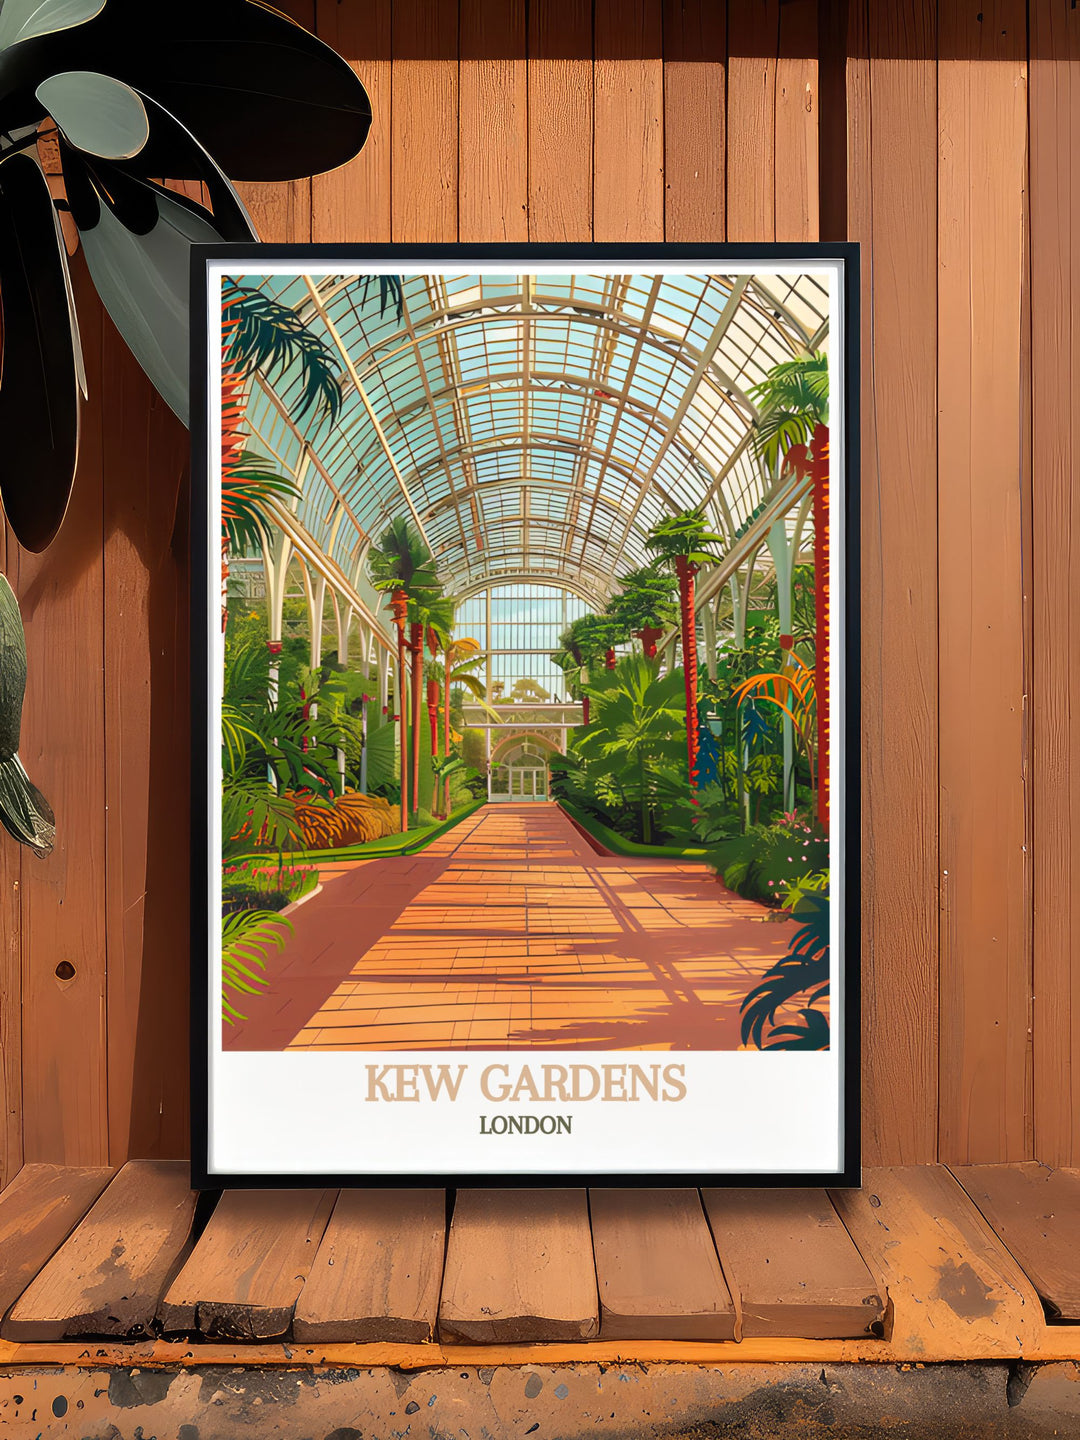 The dynamic energy of Kew Gardens, known for its stunning plant collections and beautiful gardens, is highlighted in this travel poster. Ideal for urban enthusiasts and nature lovers, this piece captures the lively spirit of Kew Gardens.